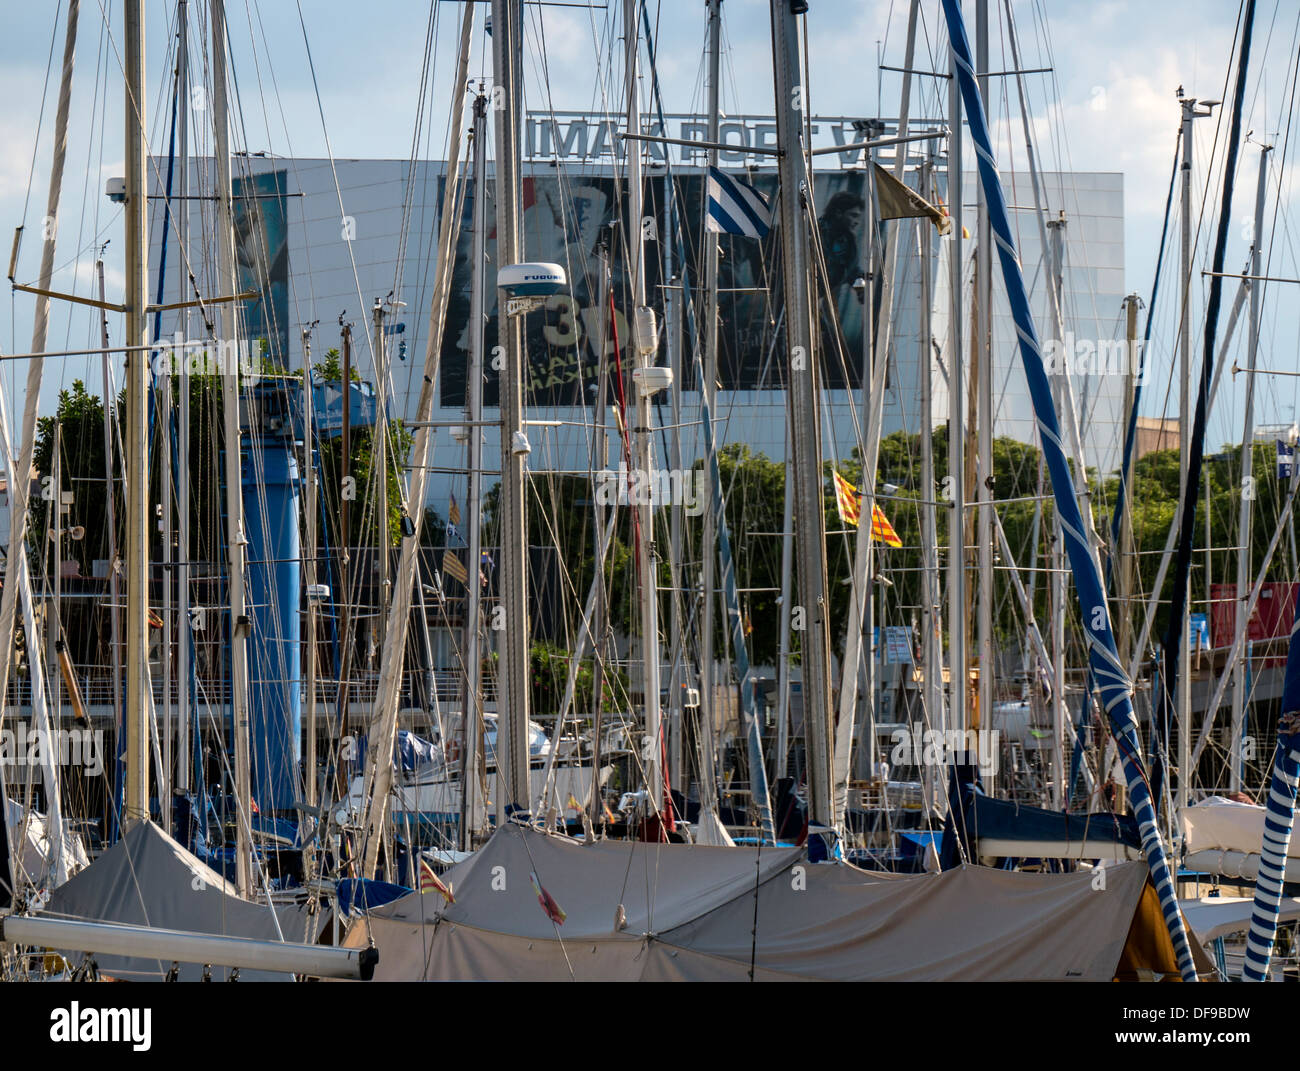 BARCELONA, SPAIN - SEPTEMBER 12, 2013:  The Marina at Port Vell with the Maremagnum Complex seen through the masts Stock Photo